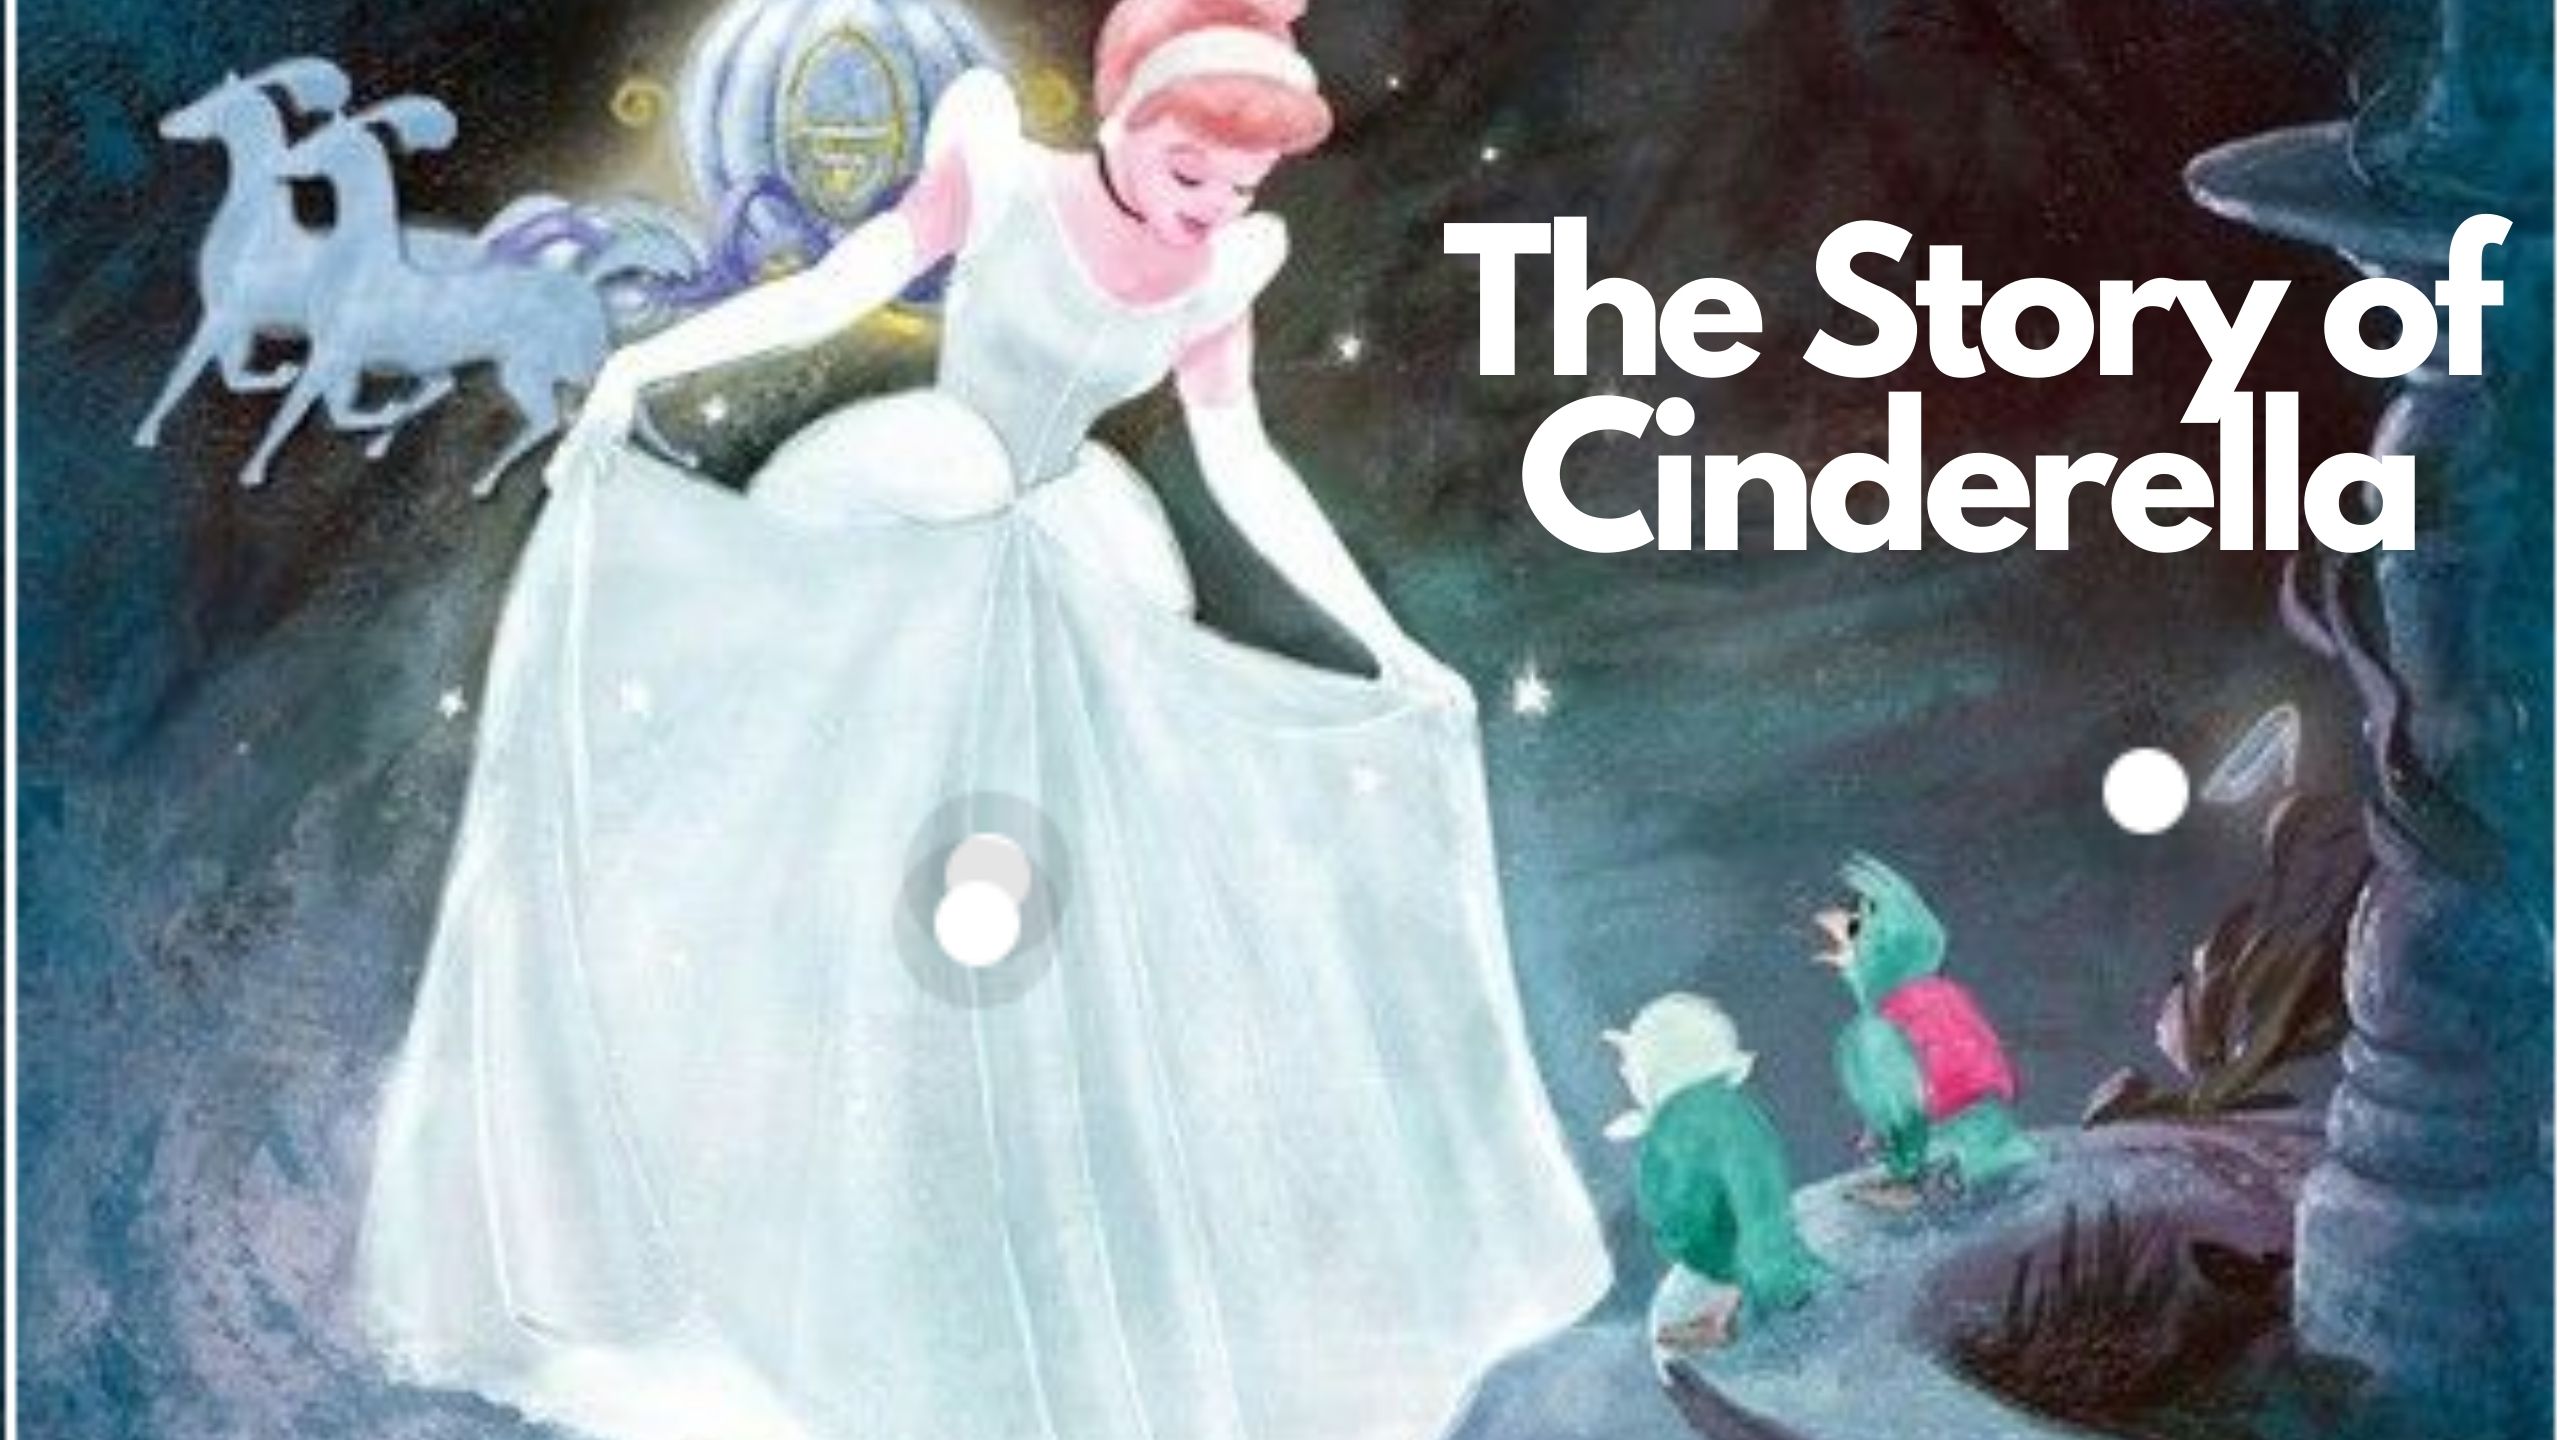 Cinderella story – bed time story for your little angel